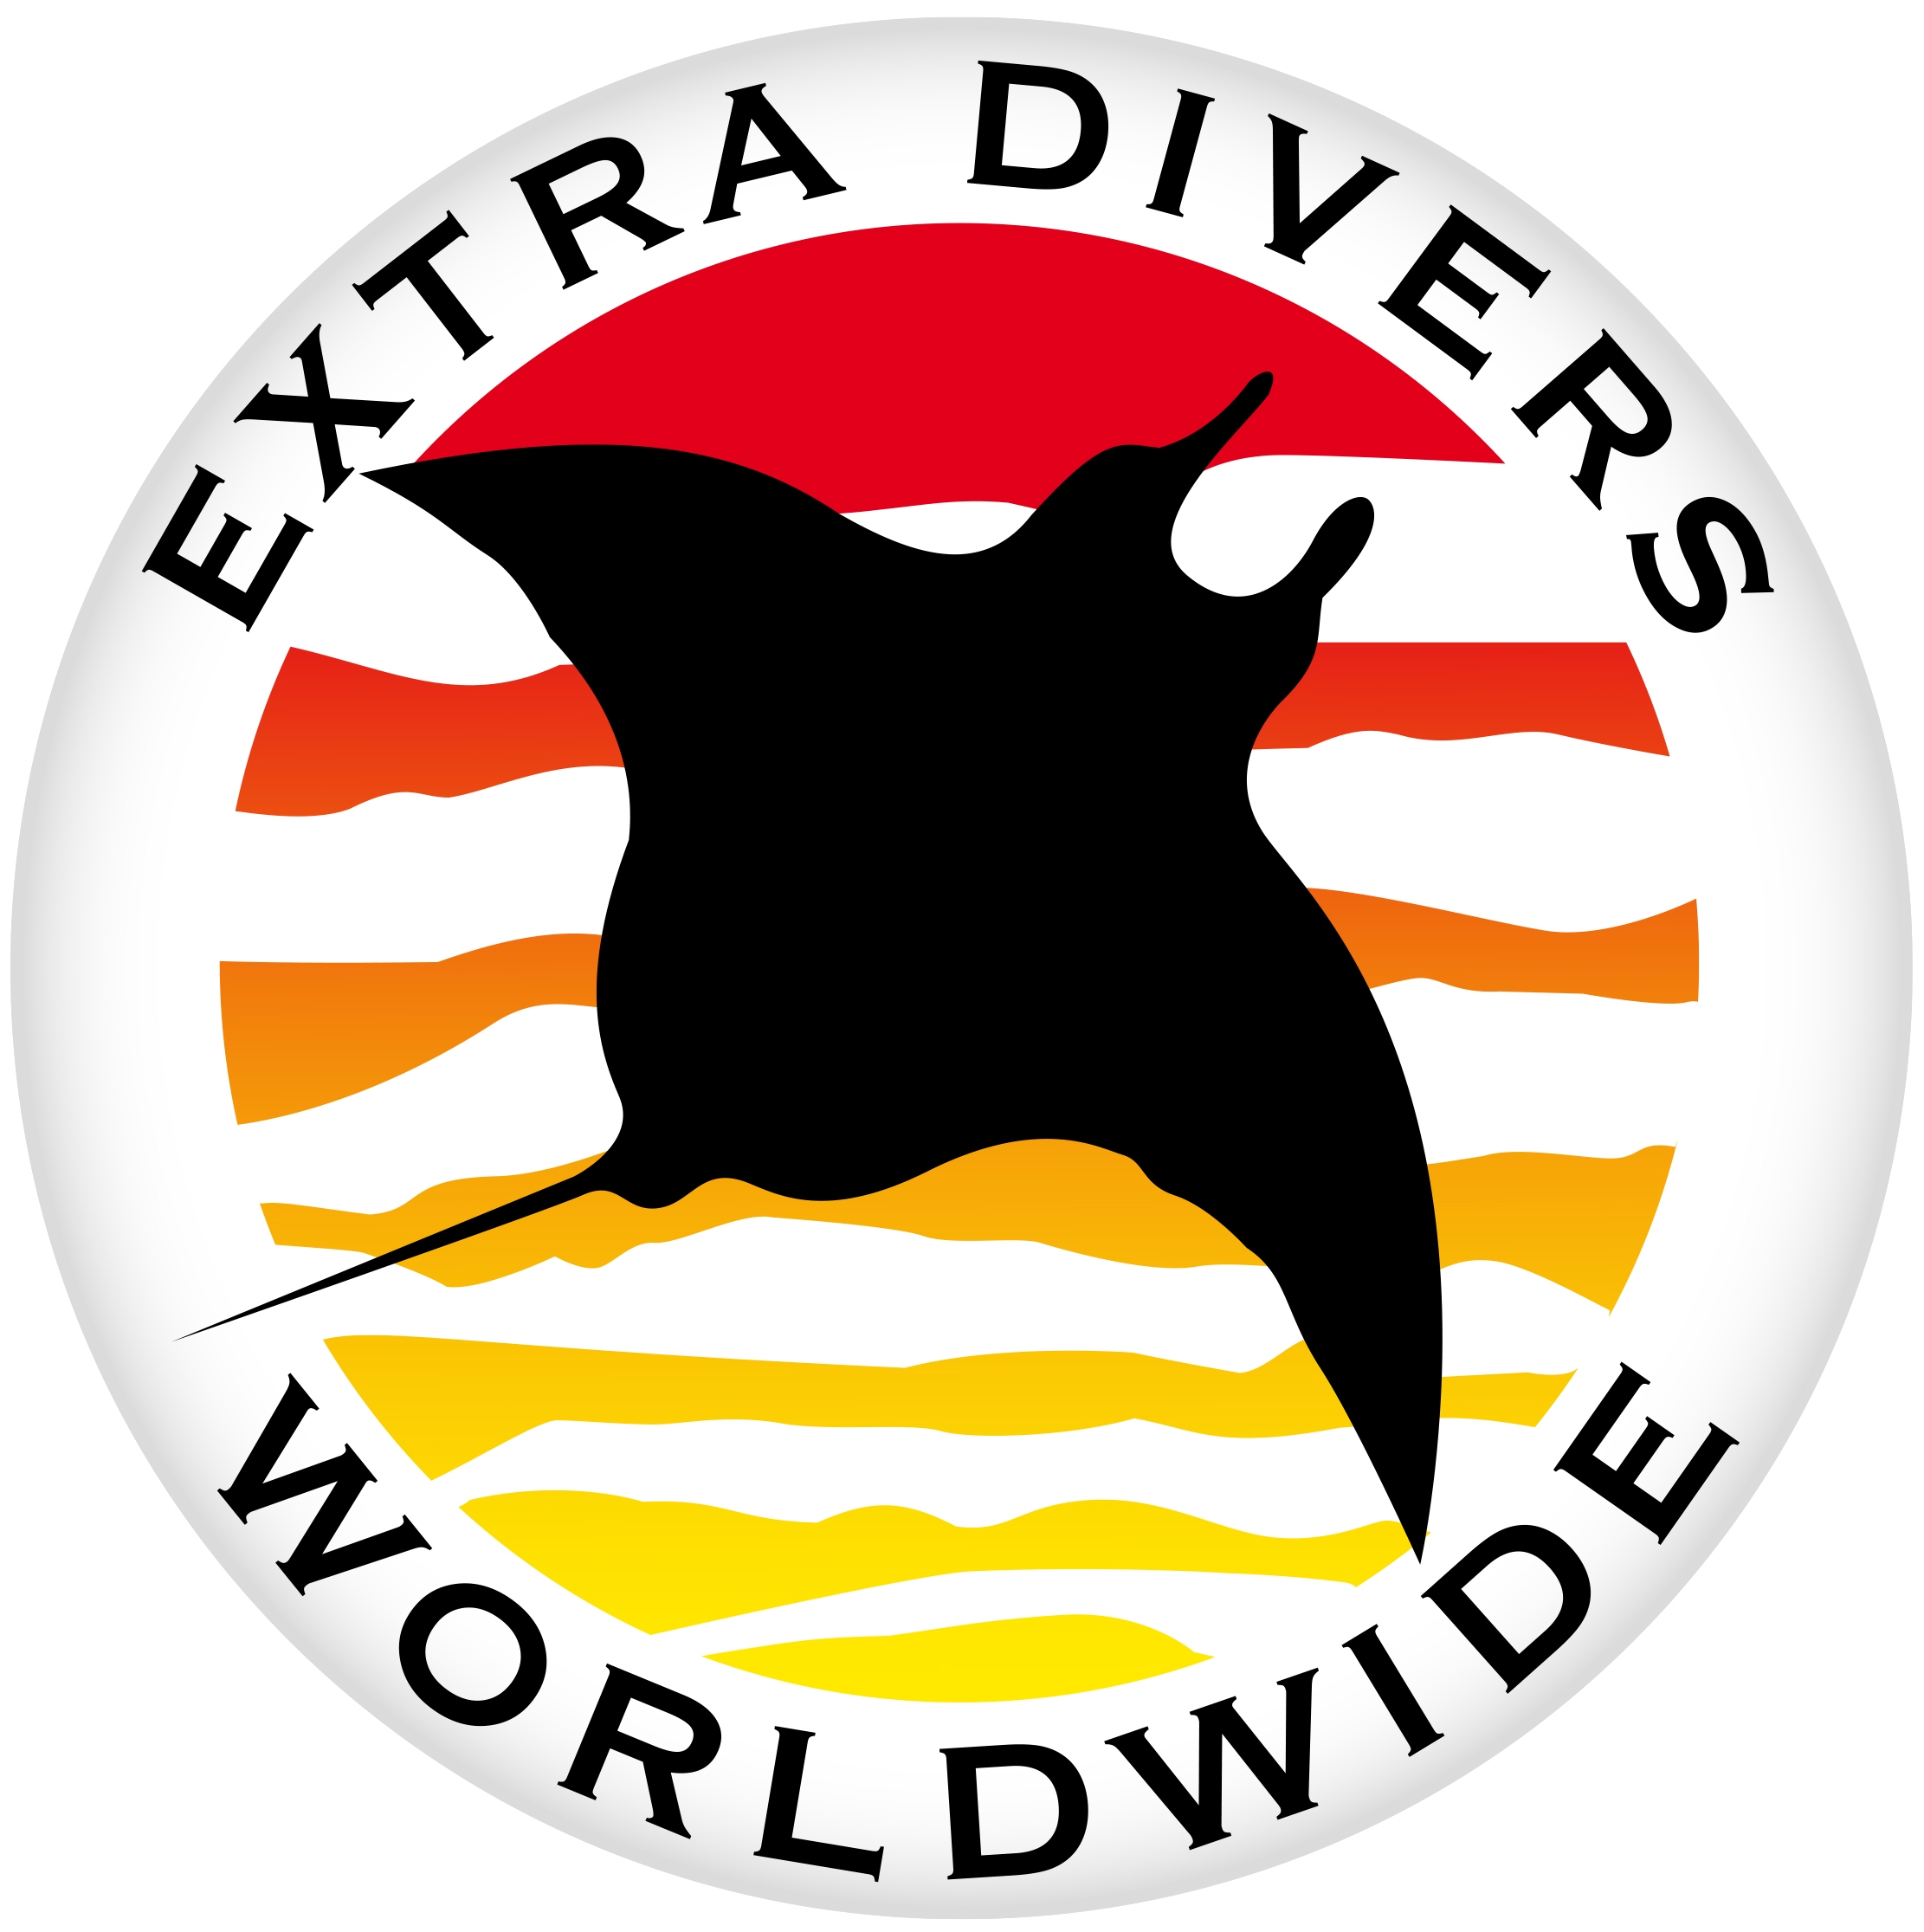 Extra divers